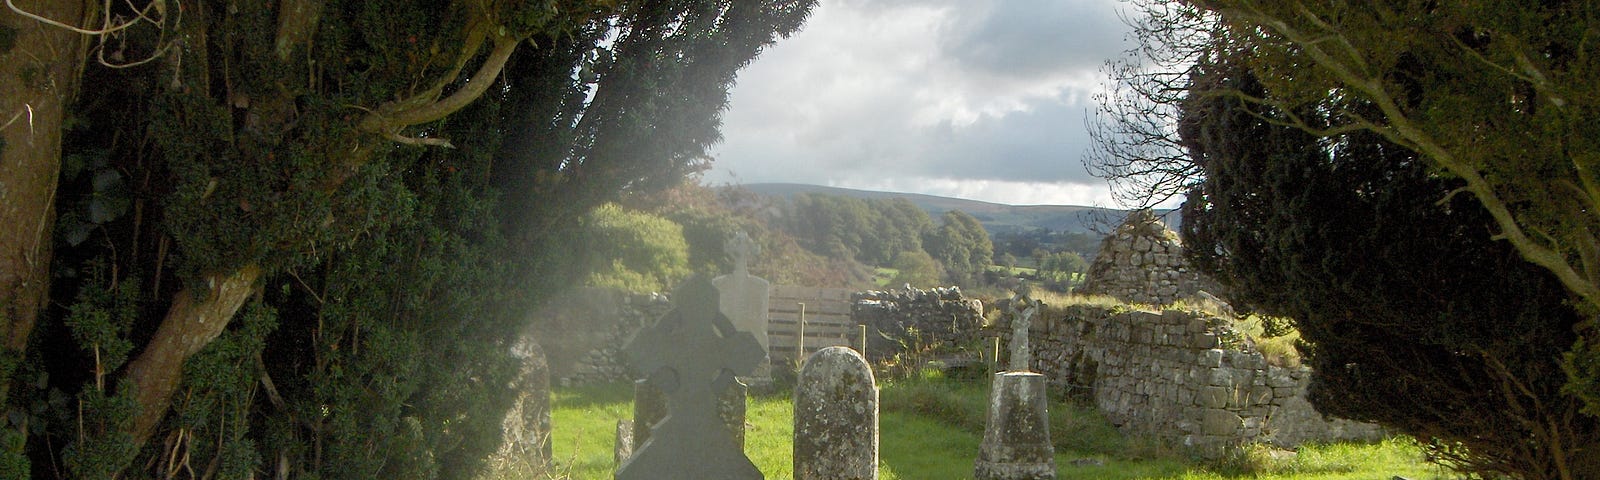 Irish graveyard, daytime with mist, tombstones between an arc of bushes.